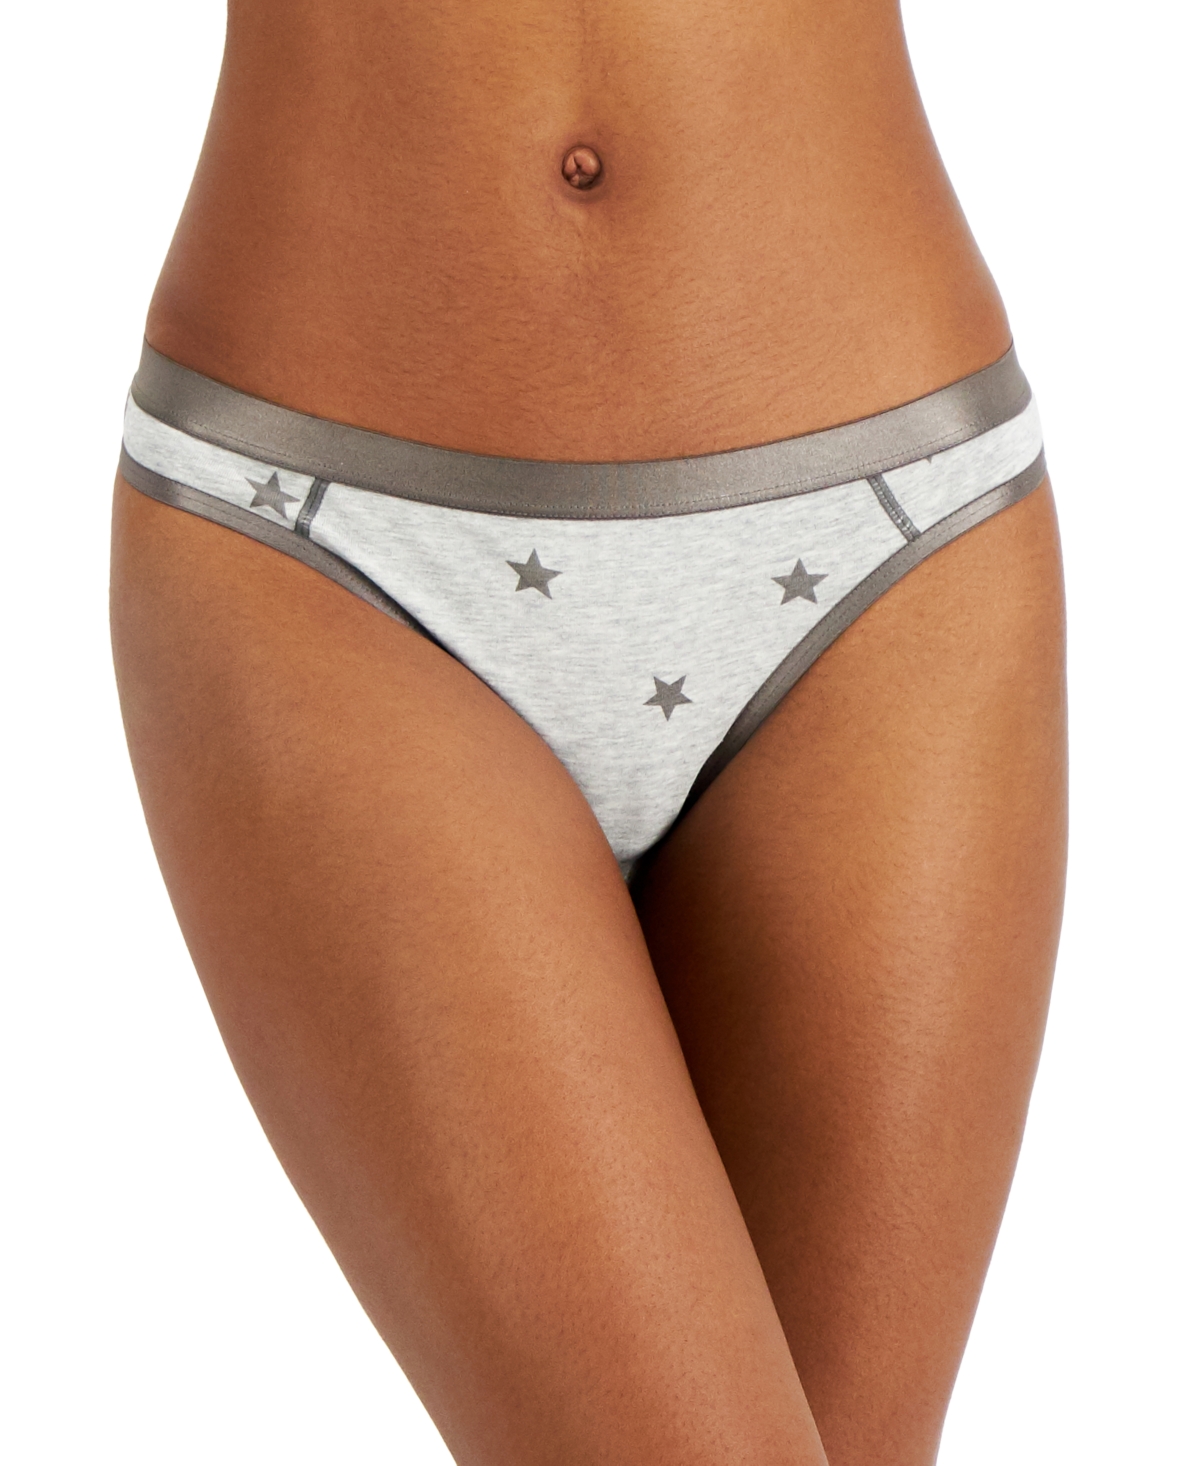 Add a touch of celestial charm to your lingerie collection with the Jenni Women's Solid Thong in a captivating Stars pattern. Crafted for comfort and style, this thong is an essential addition to any wardrobe, offering a seamless blend of functionality and feminine elegance. Features: Stars Pattern: Adorned with a stylish stars design, this thong brings a hint of sparkle and fun to your everyday essentials. Sleek Design: The solid construction provides a smooth and seamless look under clothing, ensuring no visible panty lines. Comfort Fit: Engineered for all-day comfort, the thong offers a perfect balance of stretch and support, fitting snugly without causing discomfort. Quality Fabric: Made from a premium fabric blend that is soft against the skin and provides excellent breathability, keeping you cool and comfortable. Versatile Style: Ideal for daily wear, this thong combines practicality with a touch of whimsy, making it suitable for any occasion. Material: Body: 92% Cotton, 8% Spandex Care Instructions: Machine wash cold with similar colors Use only non-chlorine bleach when needed Tumble dry low Do not iron